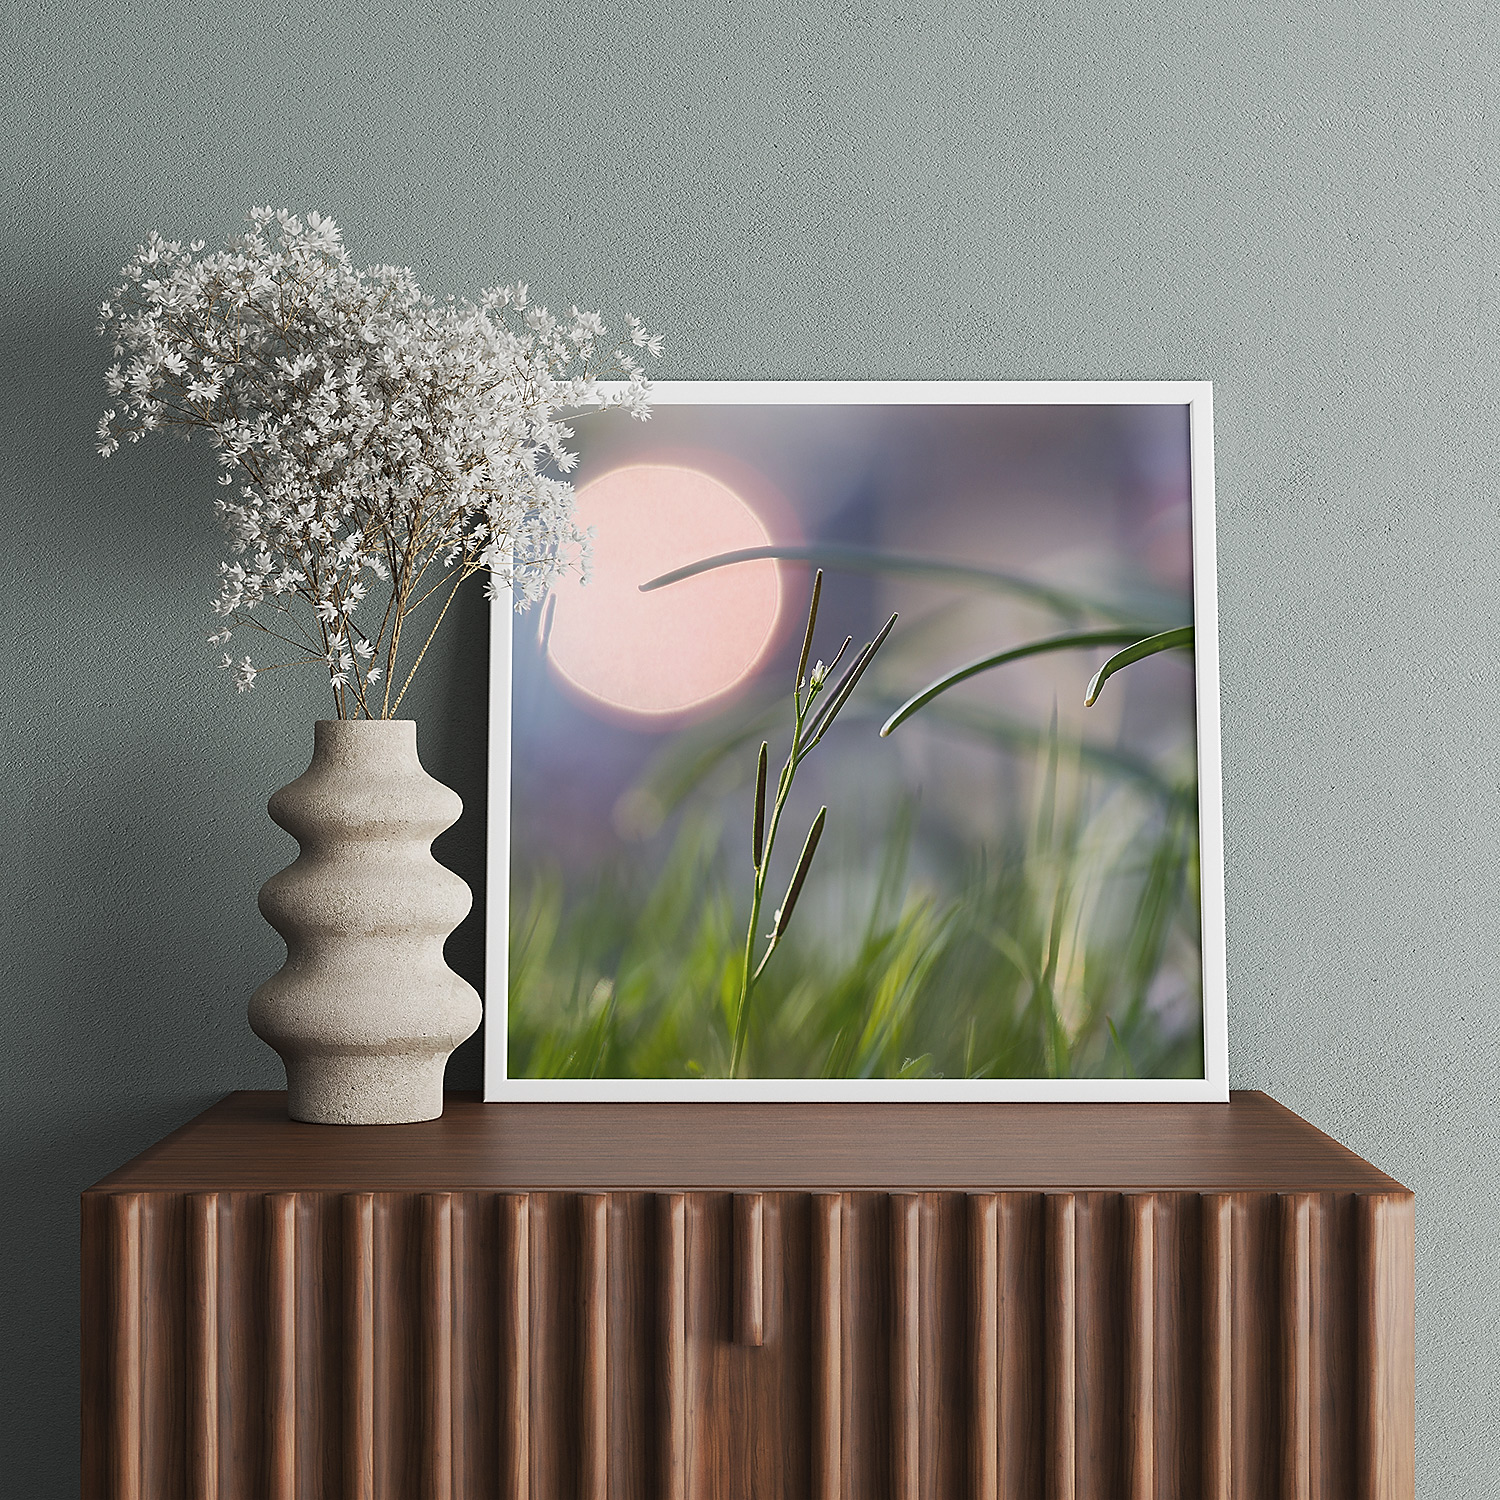 Wooden sideboard with framed 'Twilight Breeze' image and stone flower vase.